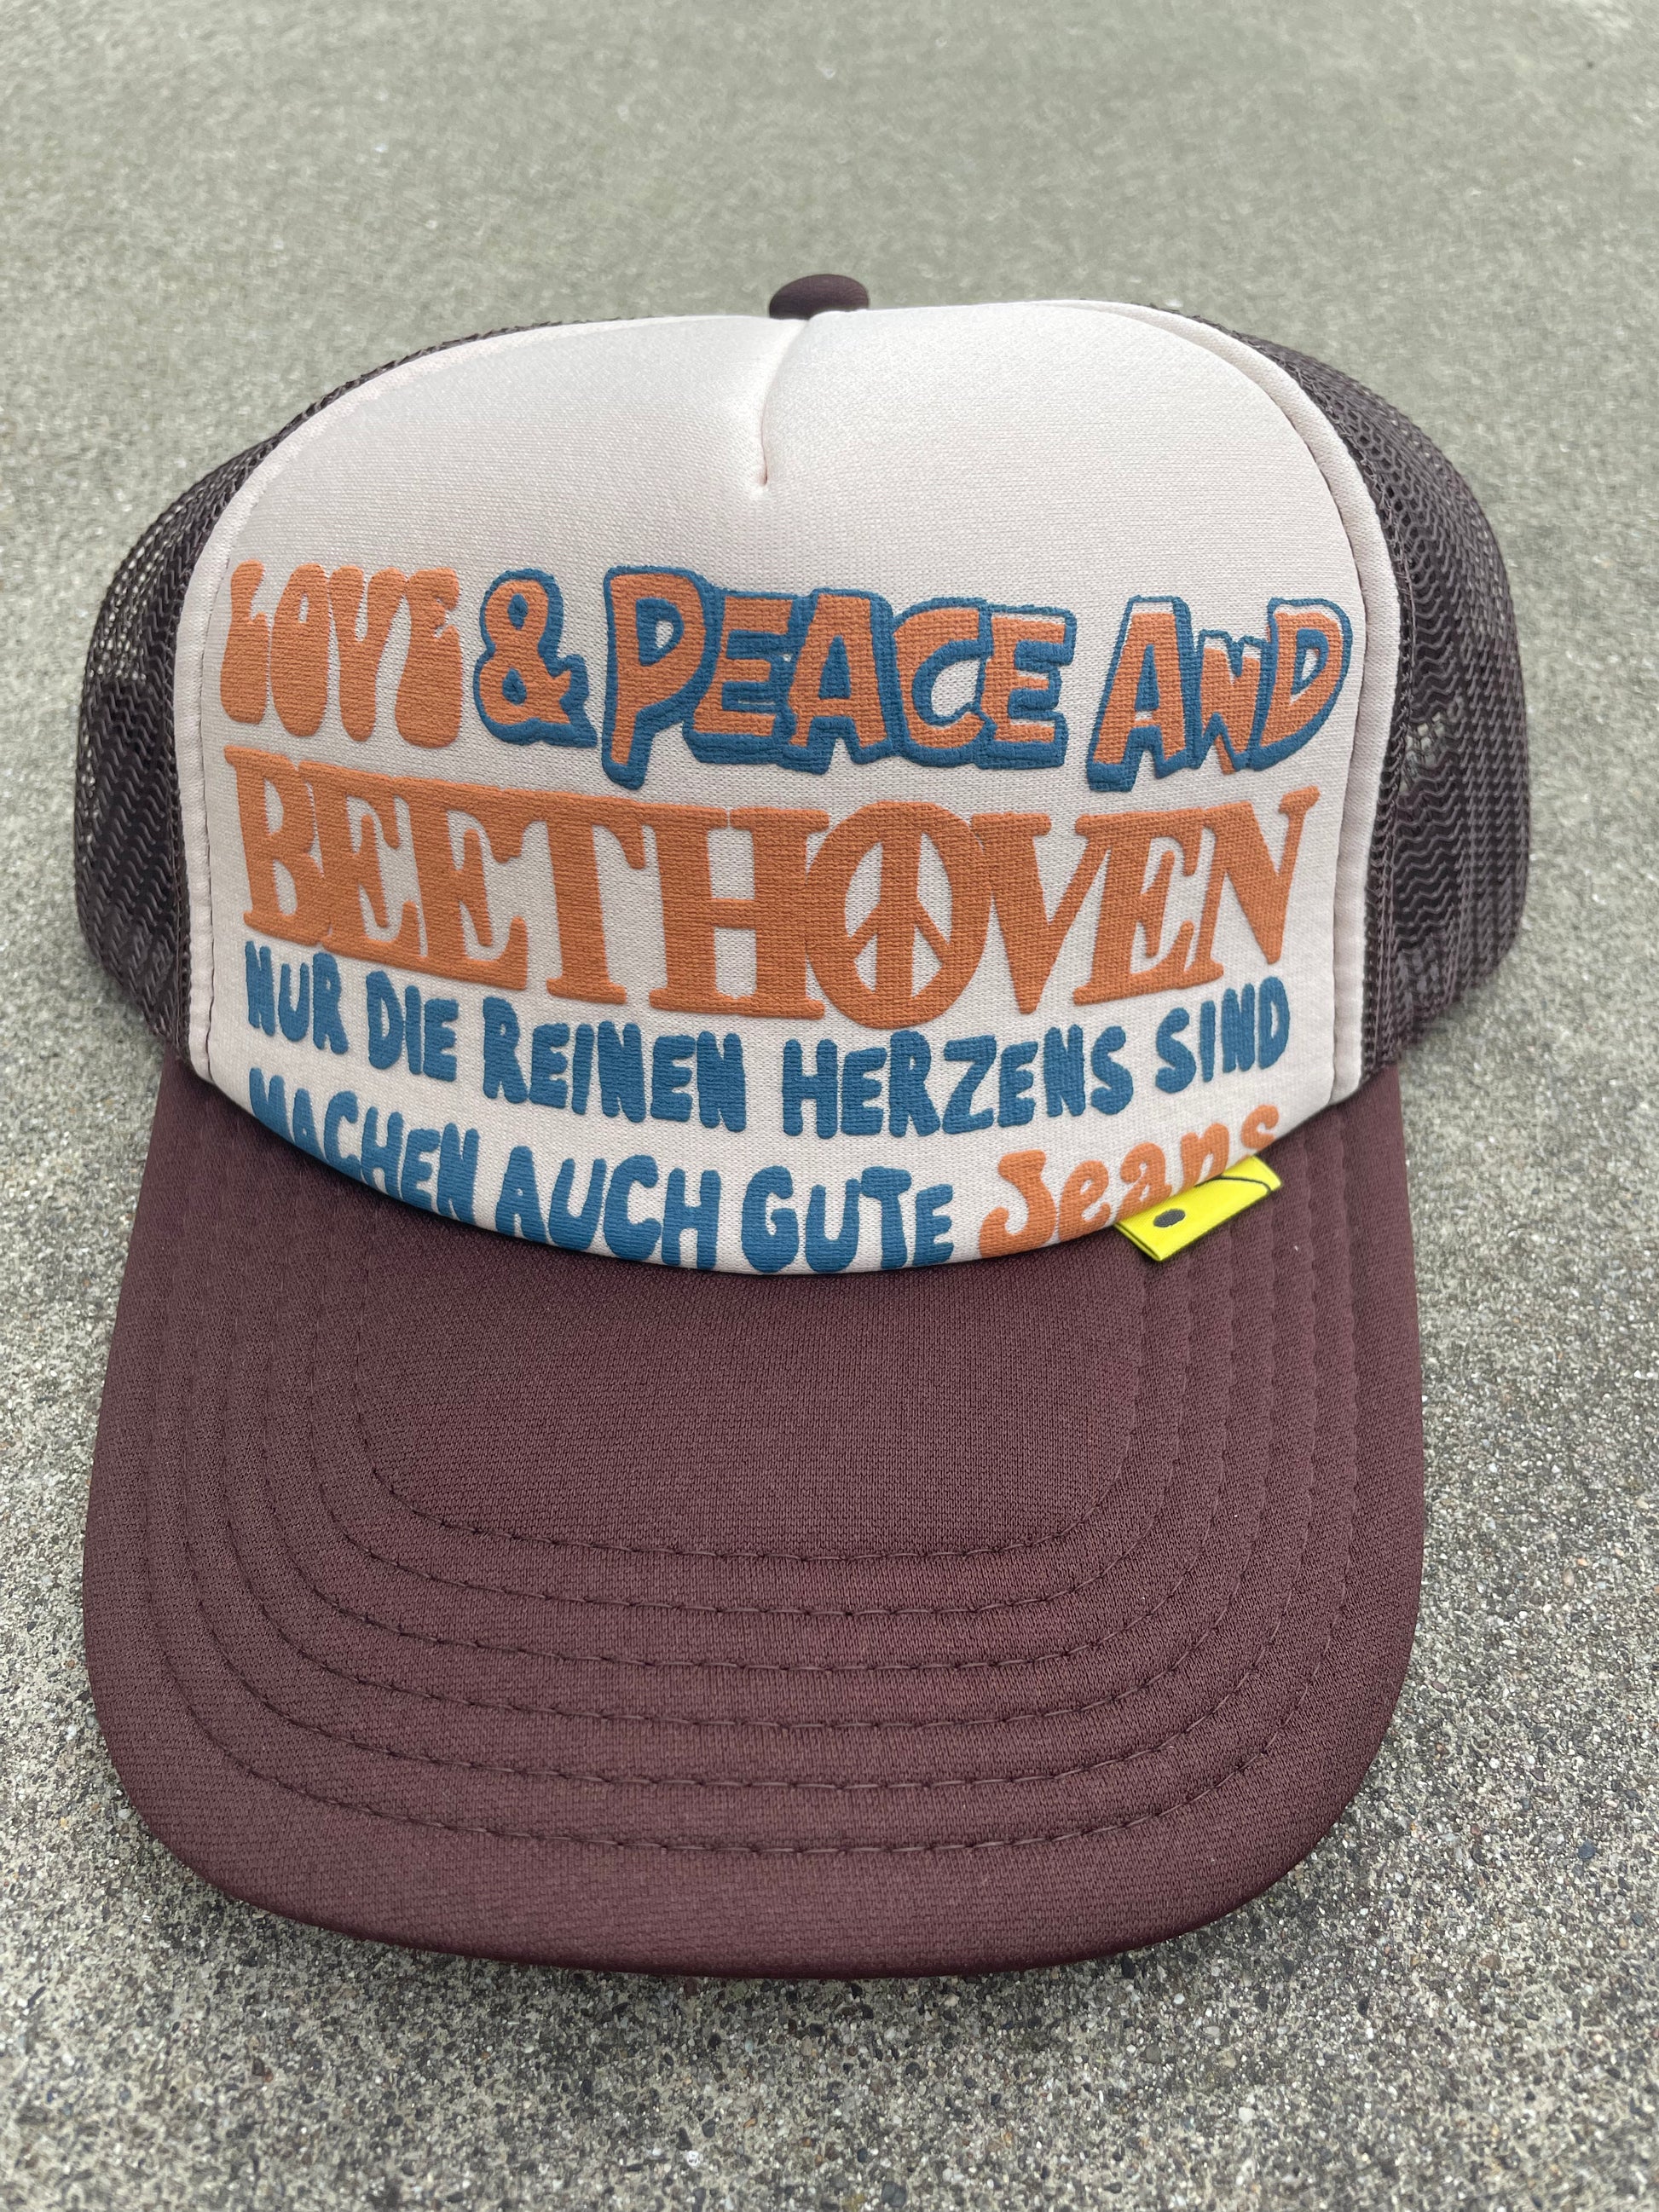 Kapital Kountry Love and Peace and Beethoven Brown Trucker Hat